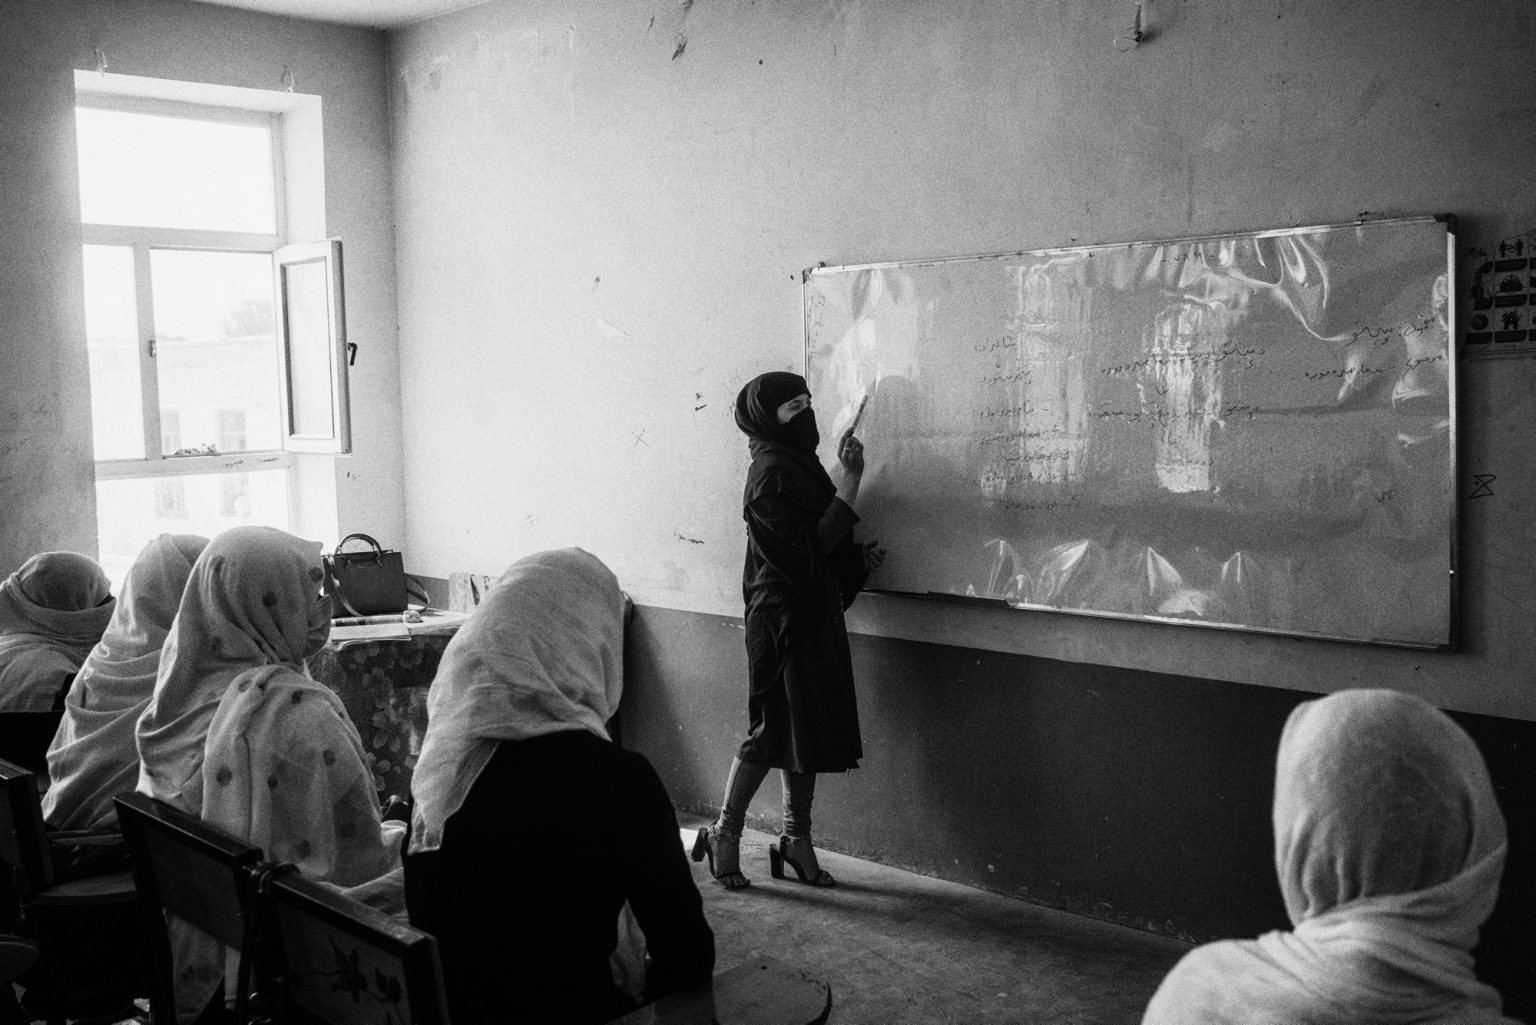 ZABUL, AFGHANISTAN - OCTOBER 20:
Girls above 6th grade are attending classes at Bibi Khala girls high school. In Kabul and most other parts of the county, the Taliban has forbidden girls older than 12 years old from attending.
(Photo by Lorenzo Tugnoli/ Washington Post/ Contrasto)